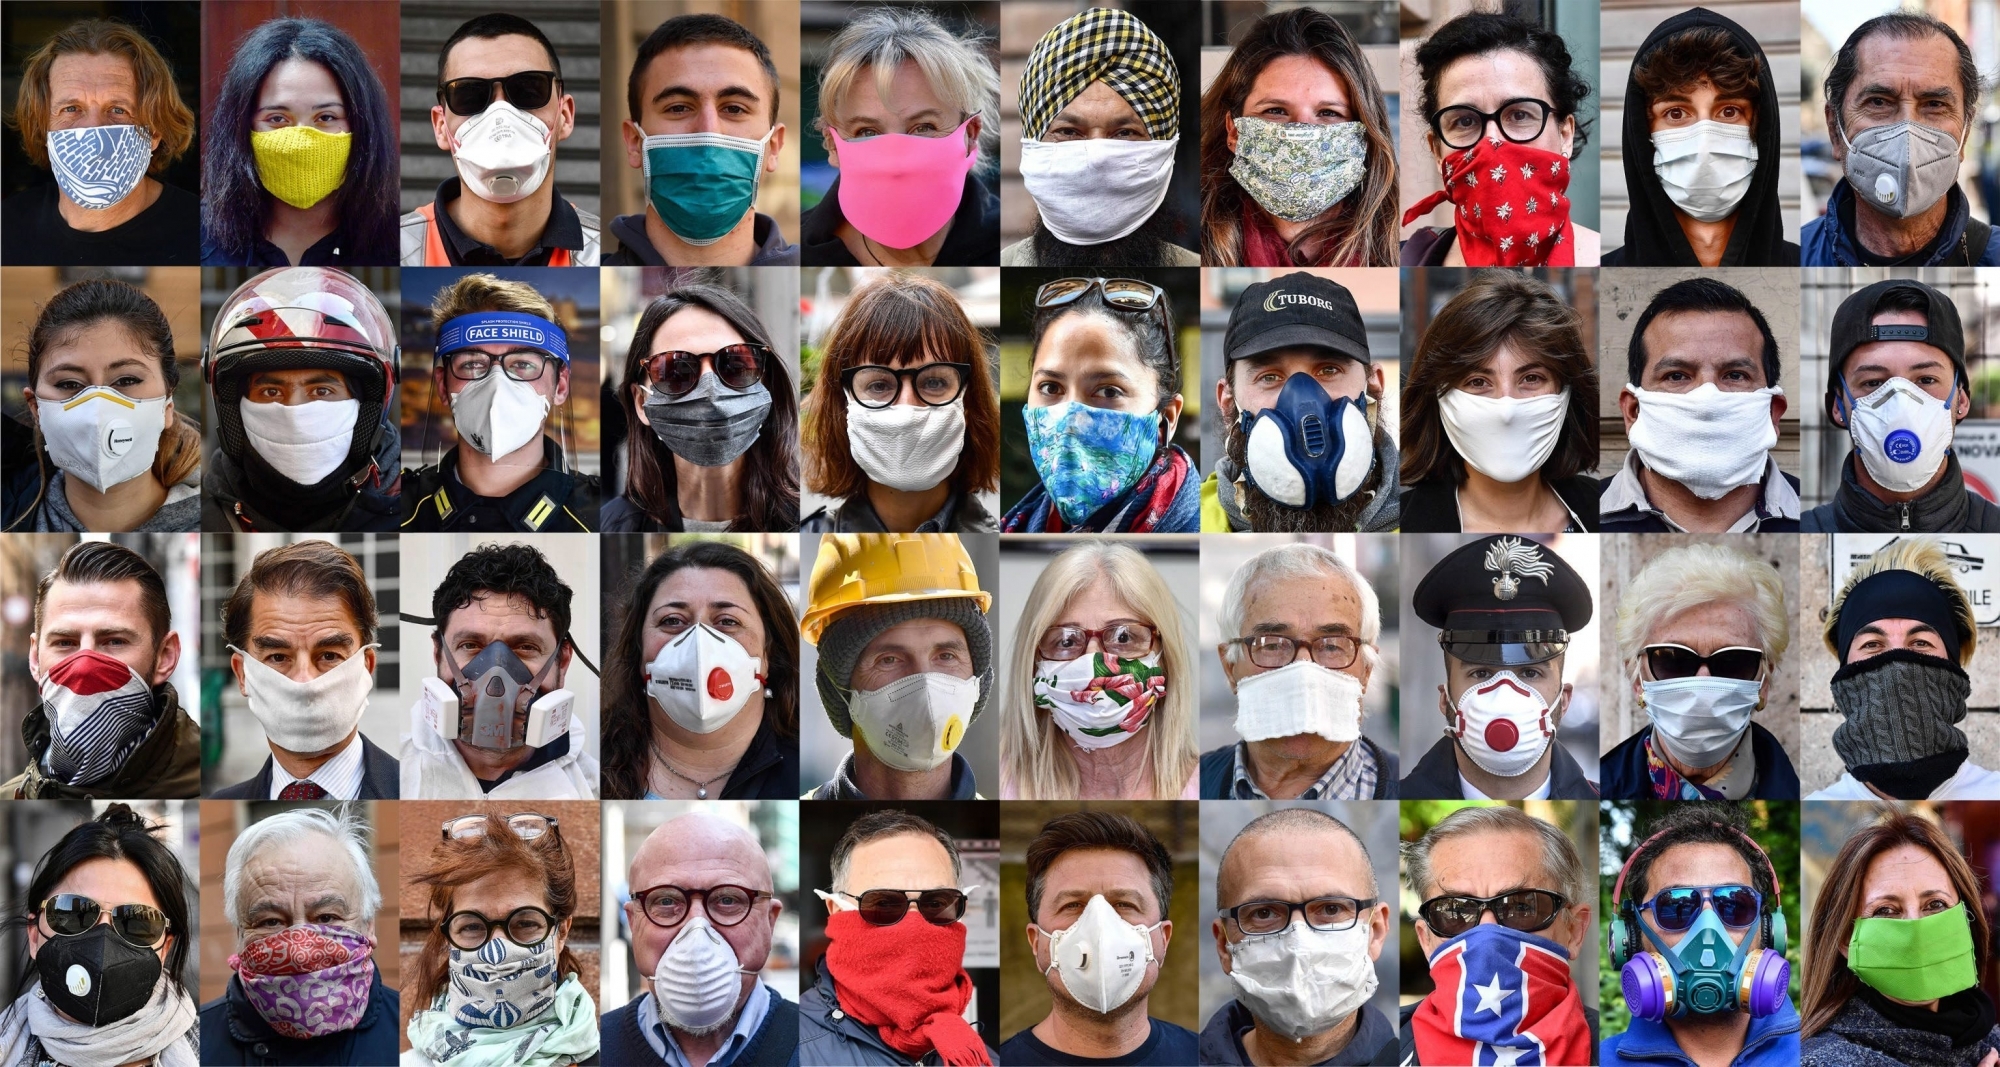 epa08366268 A combo picture shows citizens of Genoa wearing different types of protective masks during the coronavirus pandemic in Genoa, Italy, 16 April 2020. Countries around the world are taking measures to stem the widespread of the SARS-CoV-2 coronavirus which causes the Covid-19 disease. EPA/LUCA ZENNARO